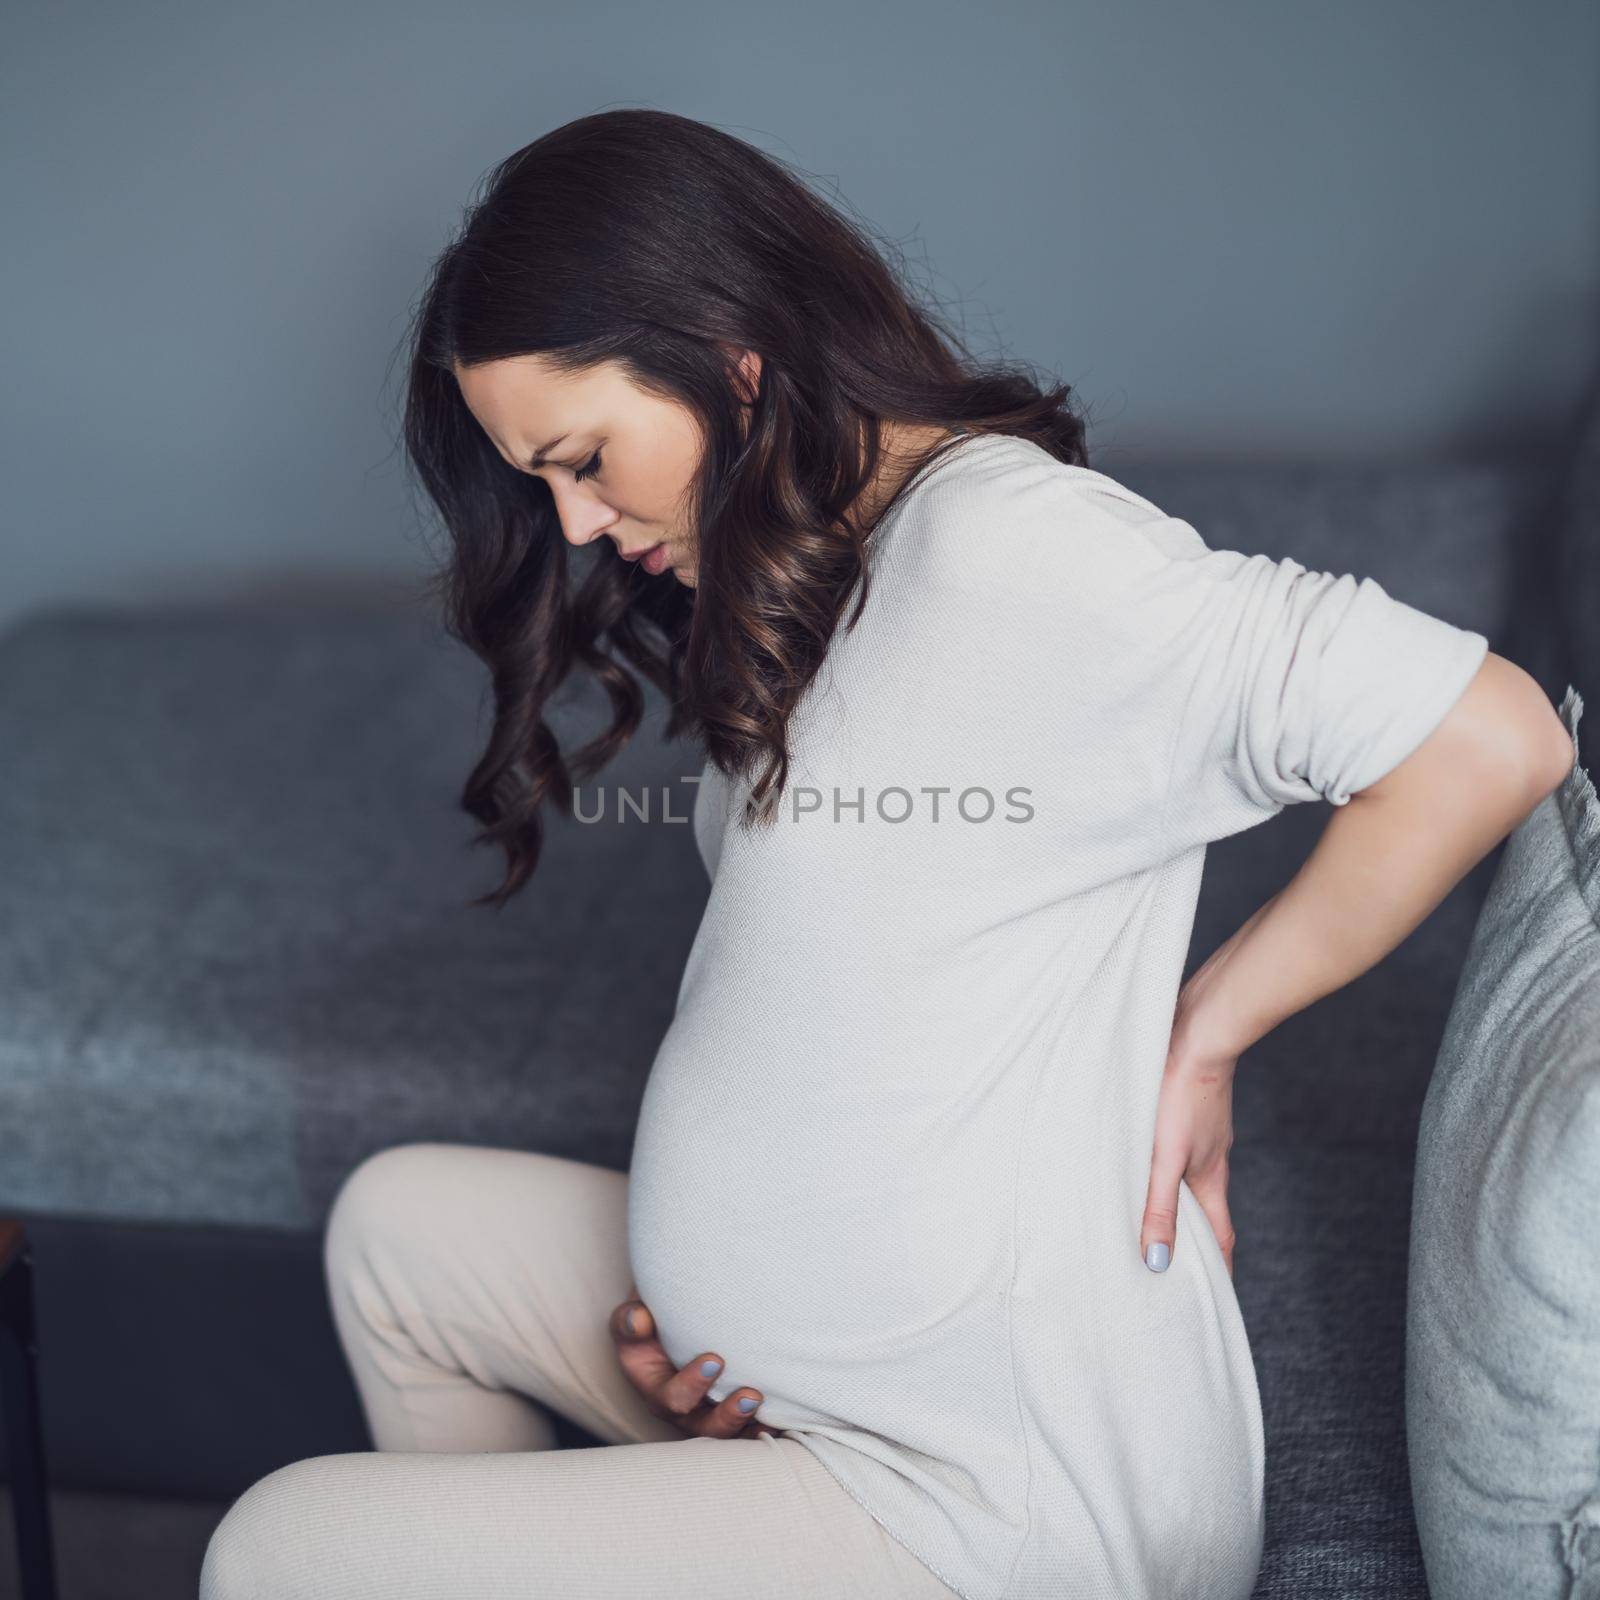 Pregnant woman is having pain in her back. She is sitting on bed at home.